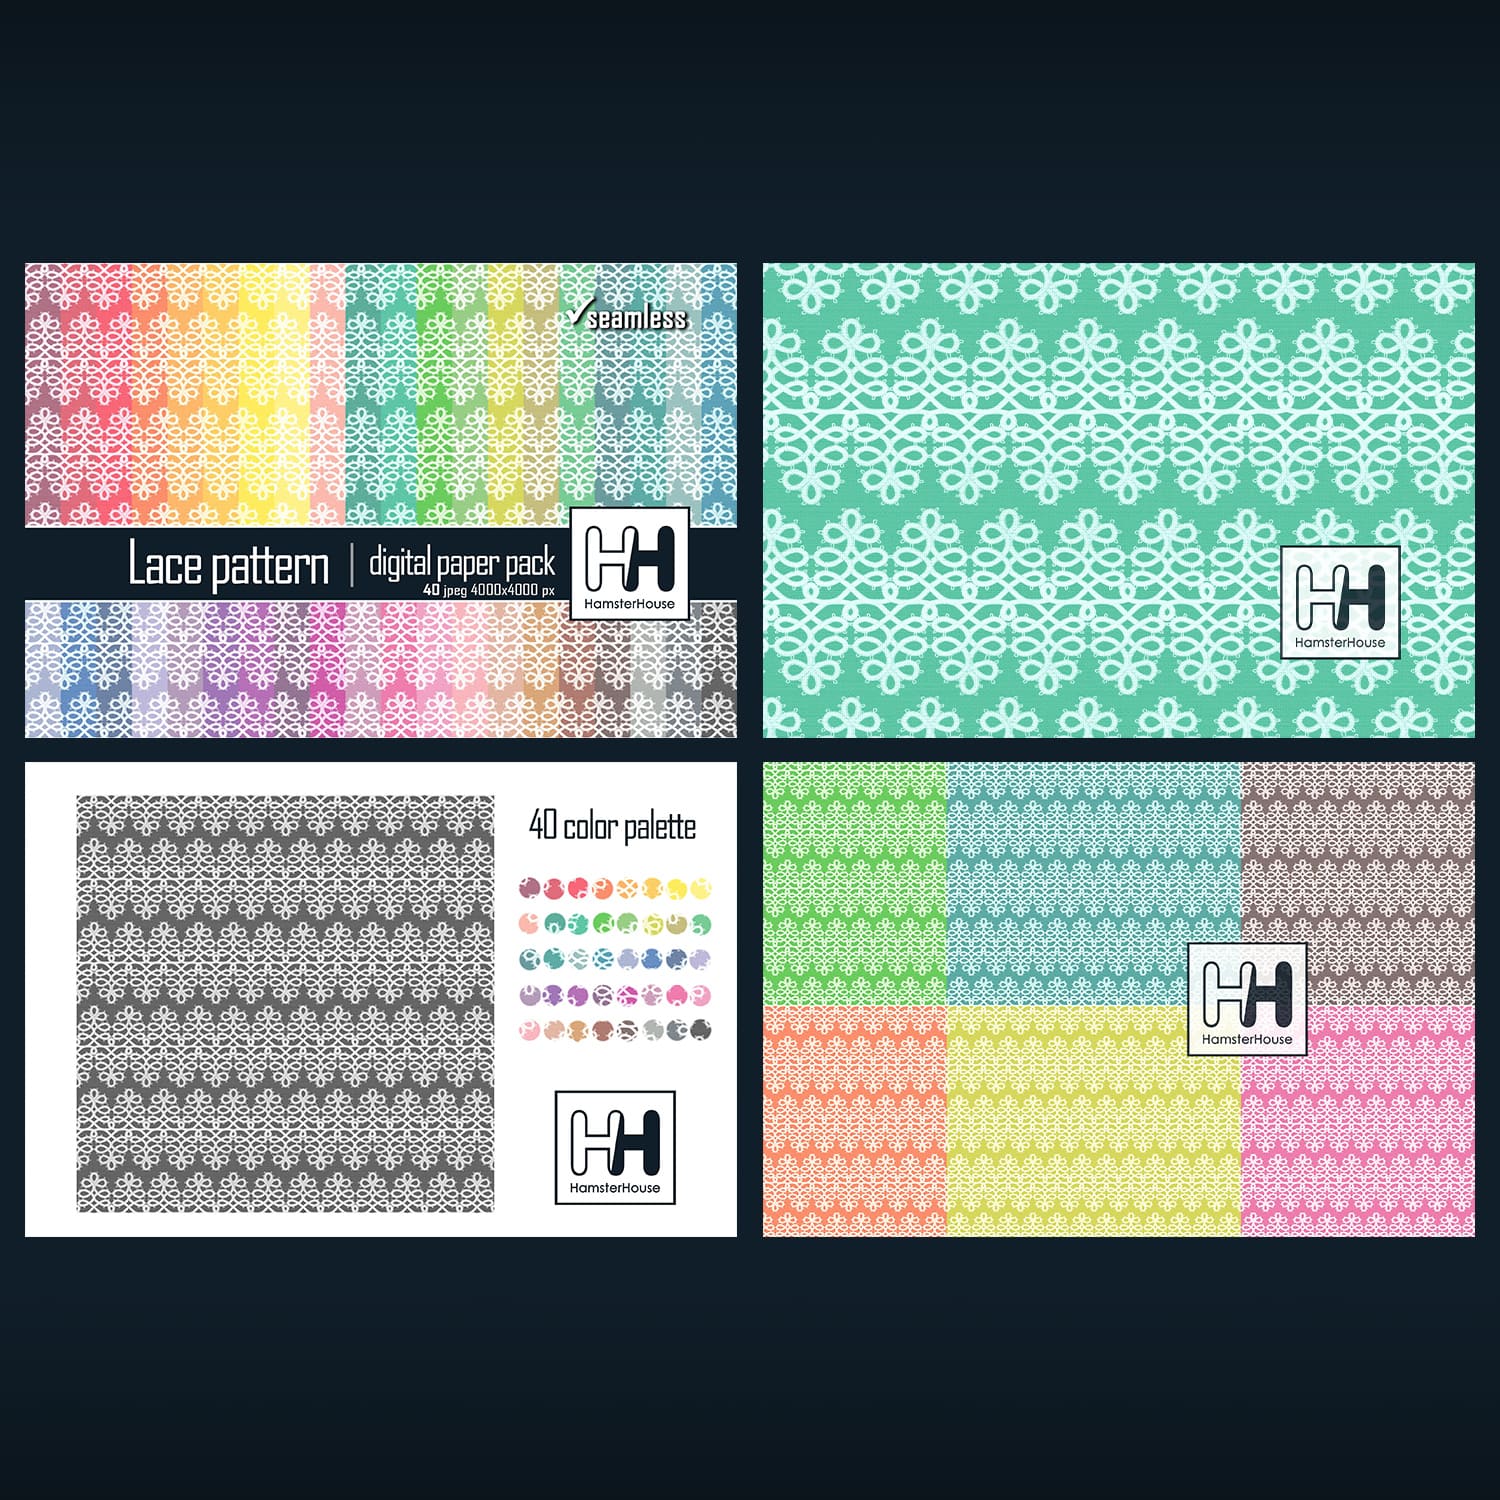 Lace Pattern Digital Paper Pack, 40 Colors Cover.